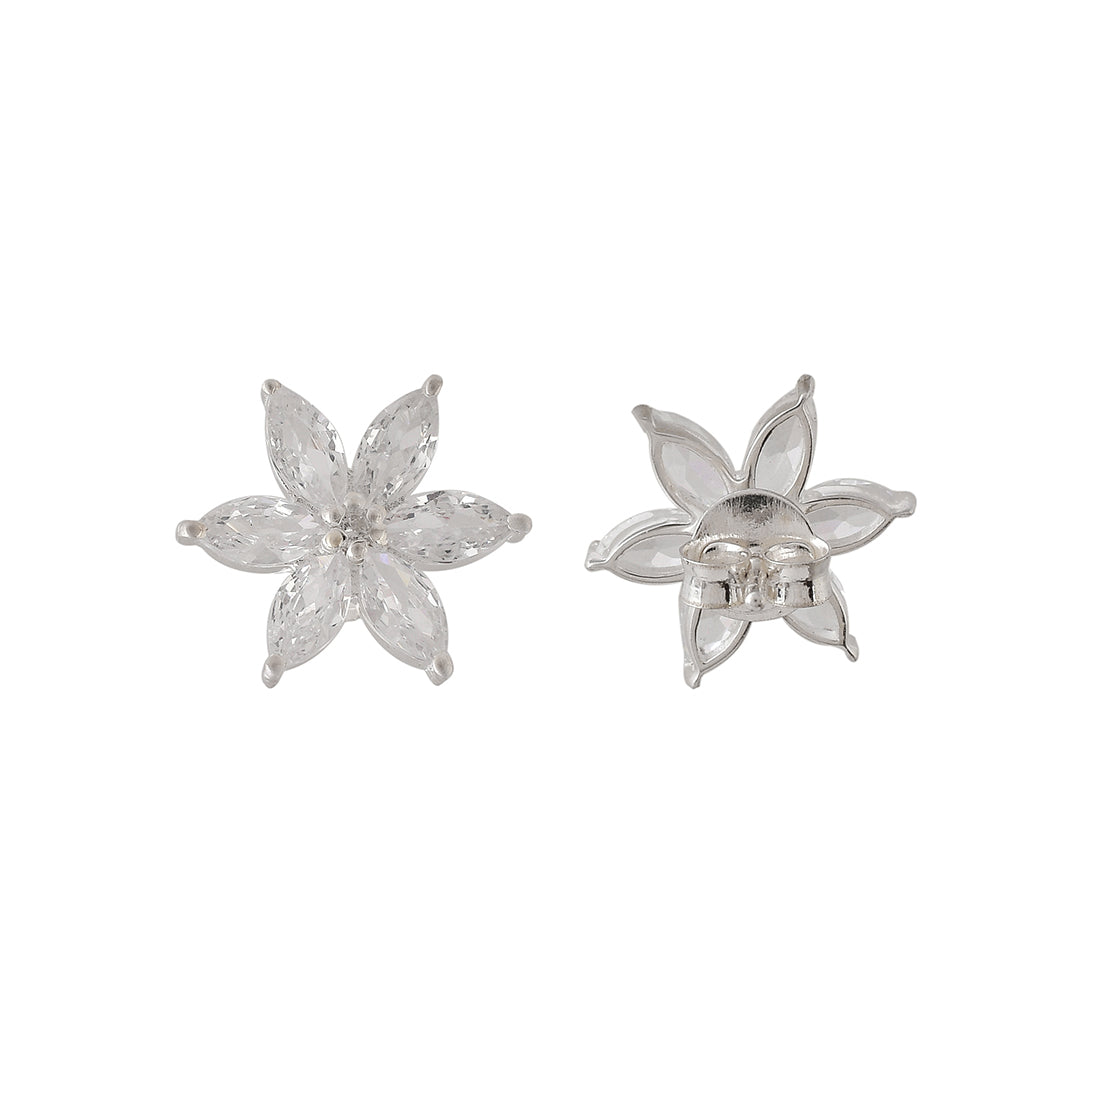 Floral Motif Silver Plated 925 Sterling Silver Earrings